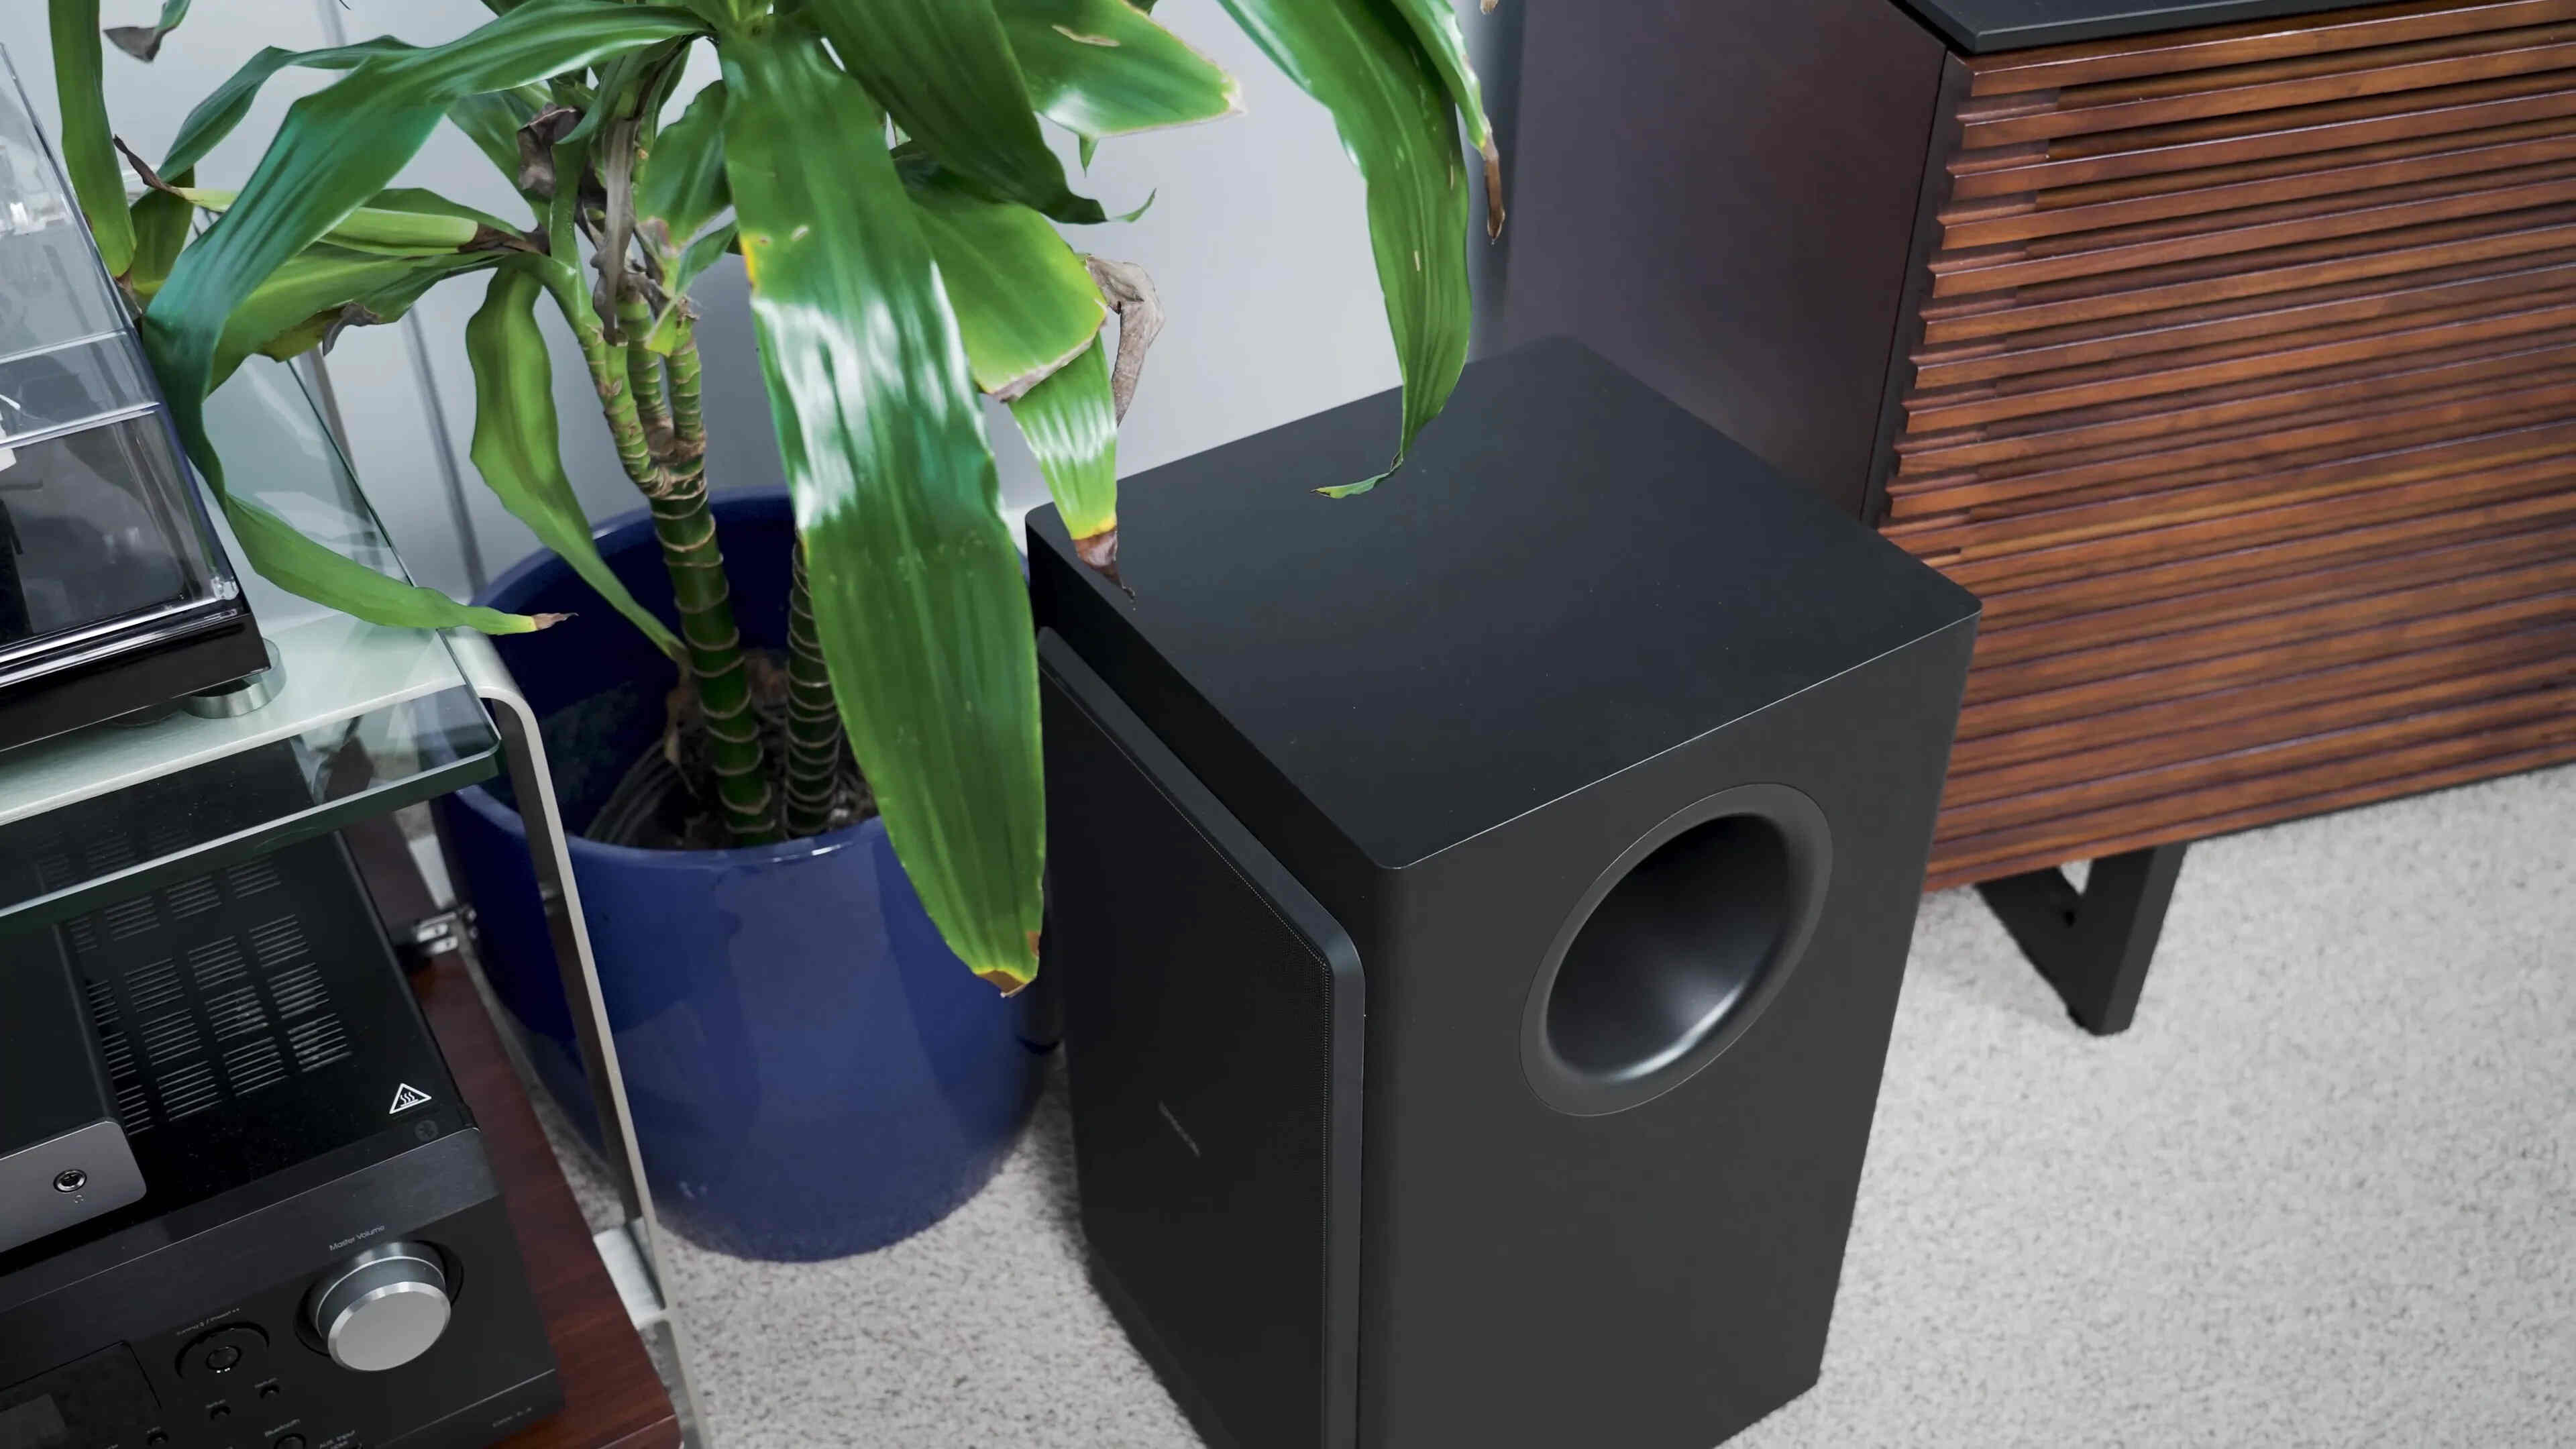 before-you-buy-a-subwoofer-what-factors-are-important